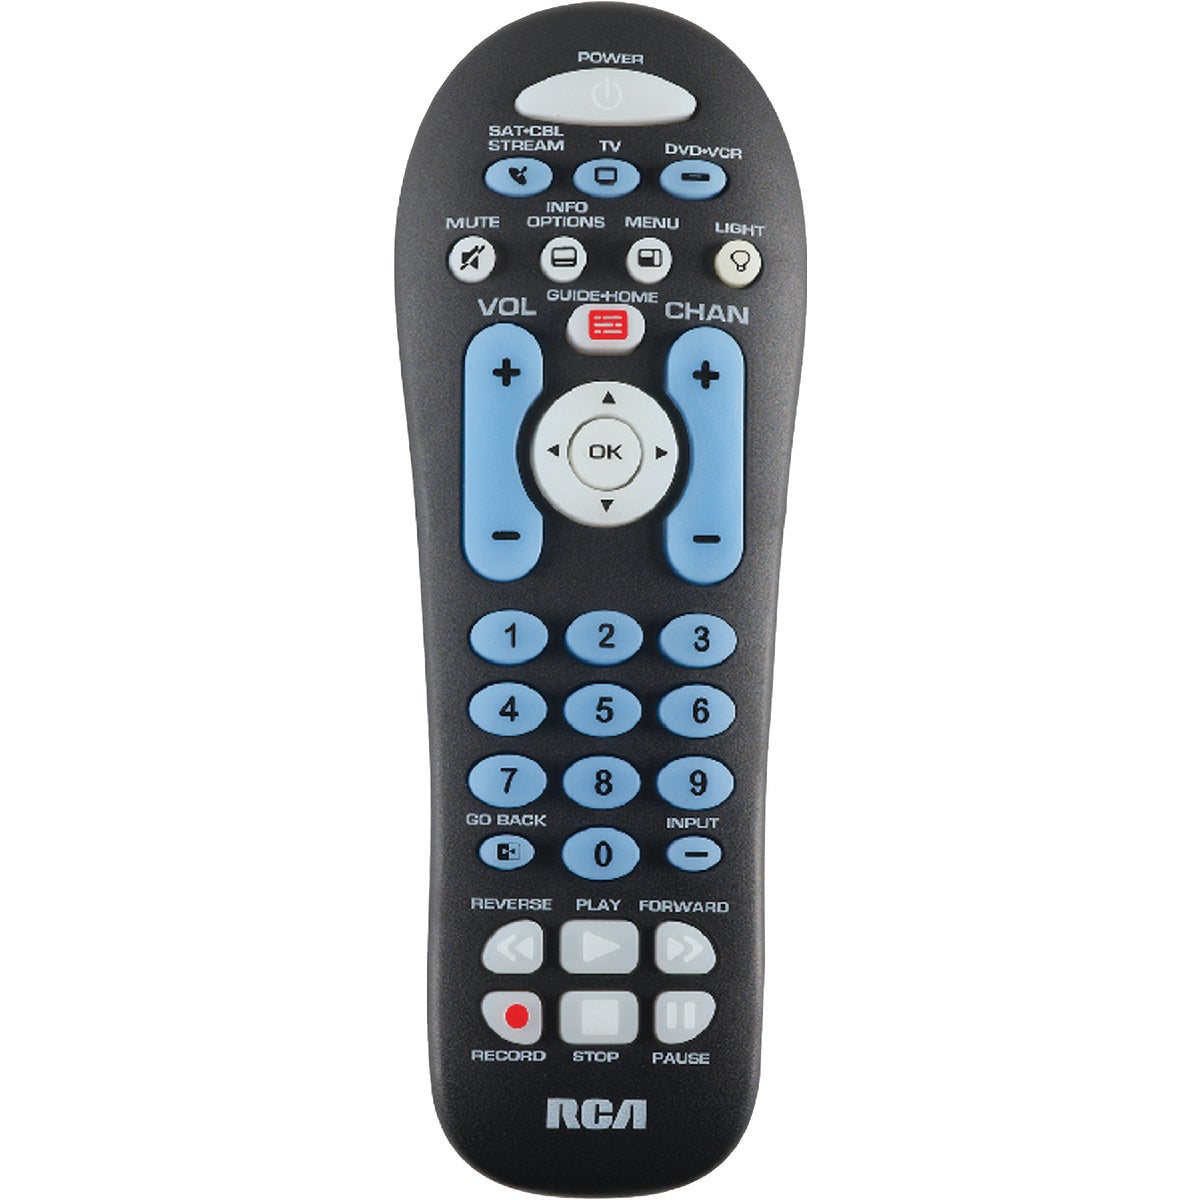 Item 502855, RCA remote control featuring a partially backlit keypad.